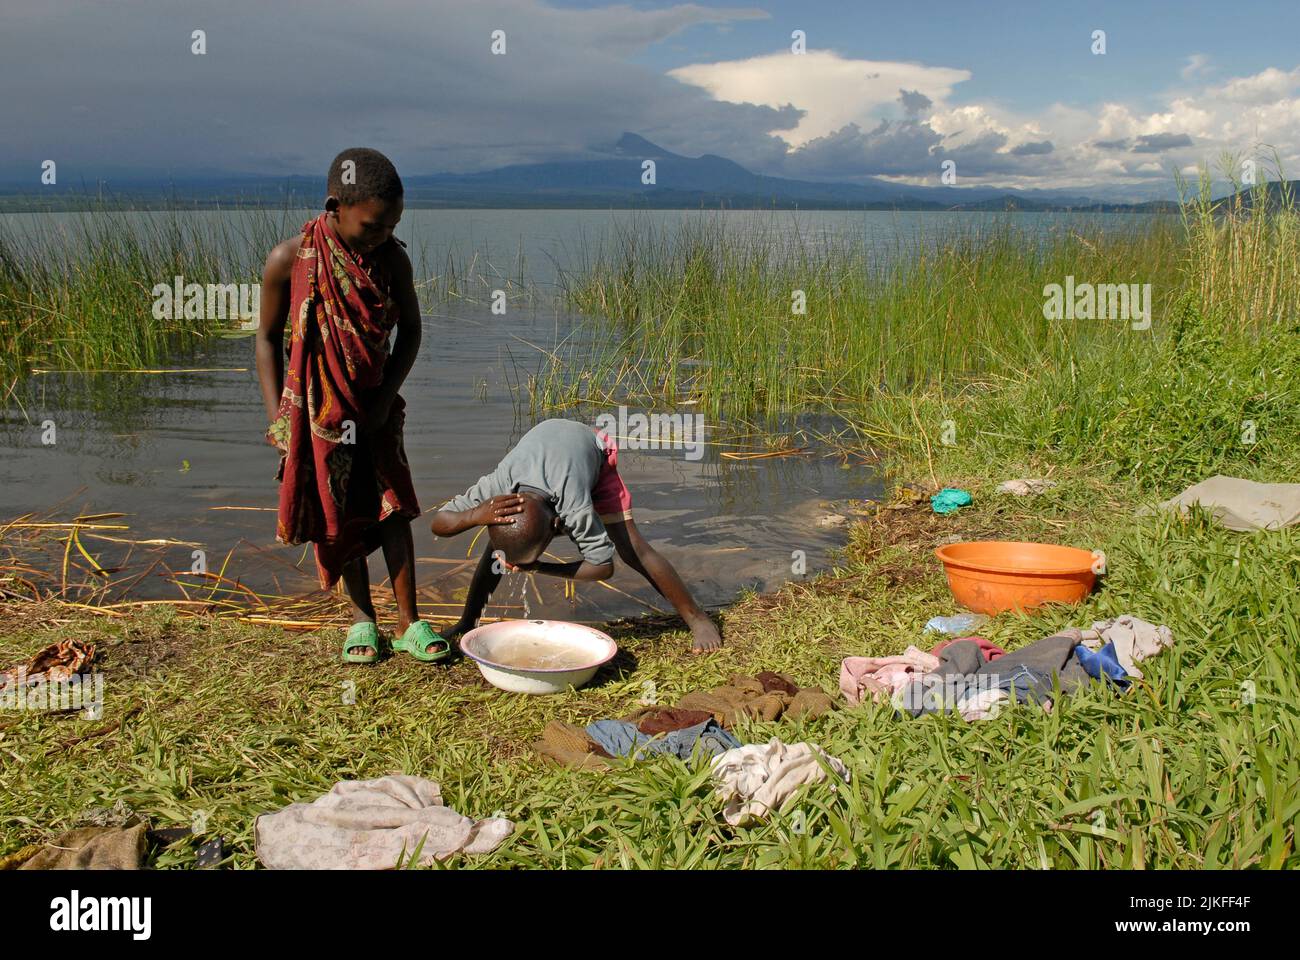 A boy washes himself with water from bucket at the shore of lake Kivu in North Kivu, DR Congo Africa Stock Photo